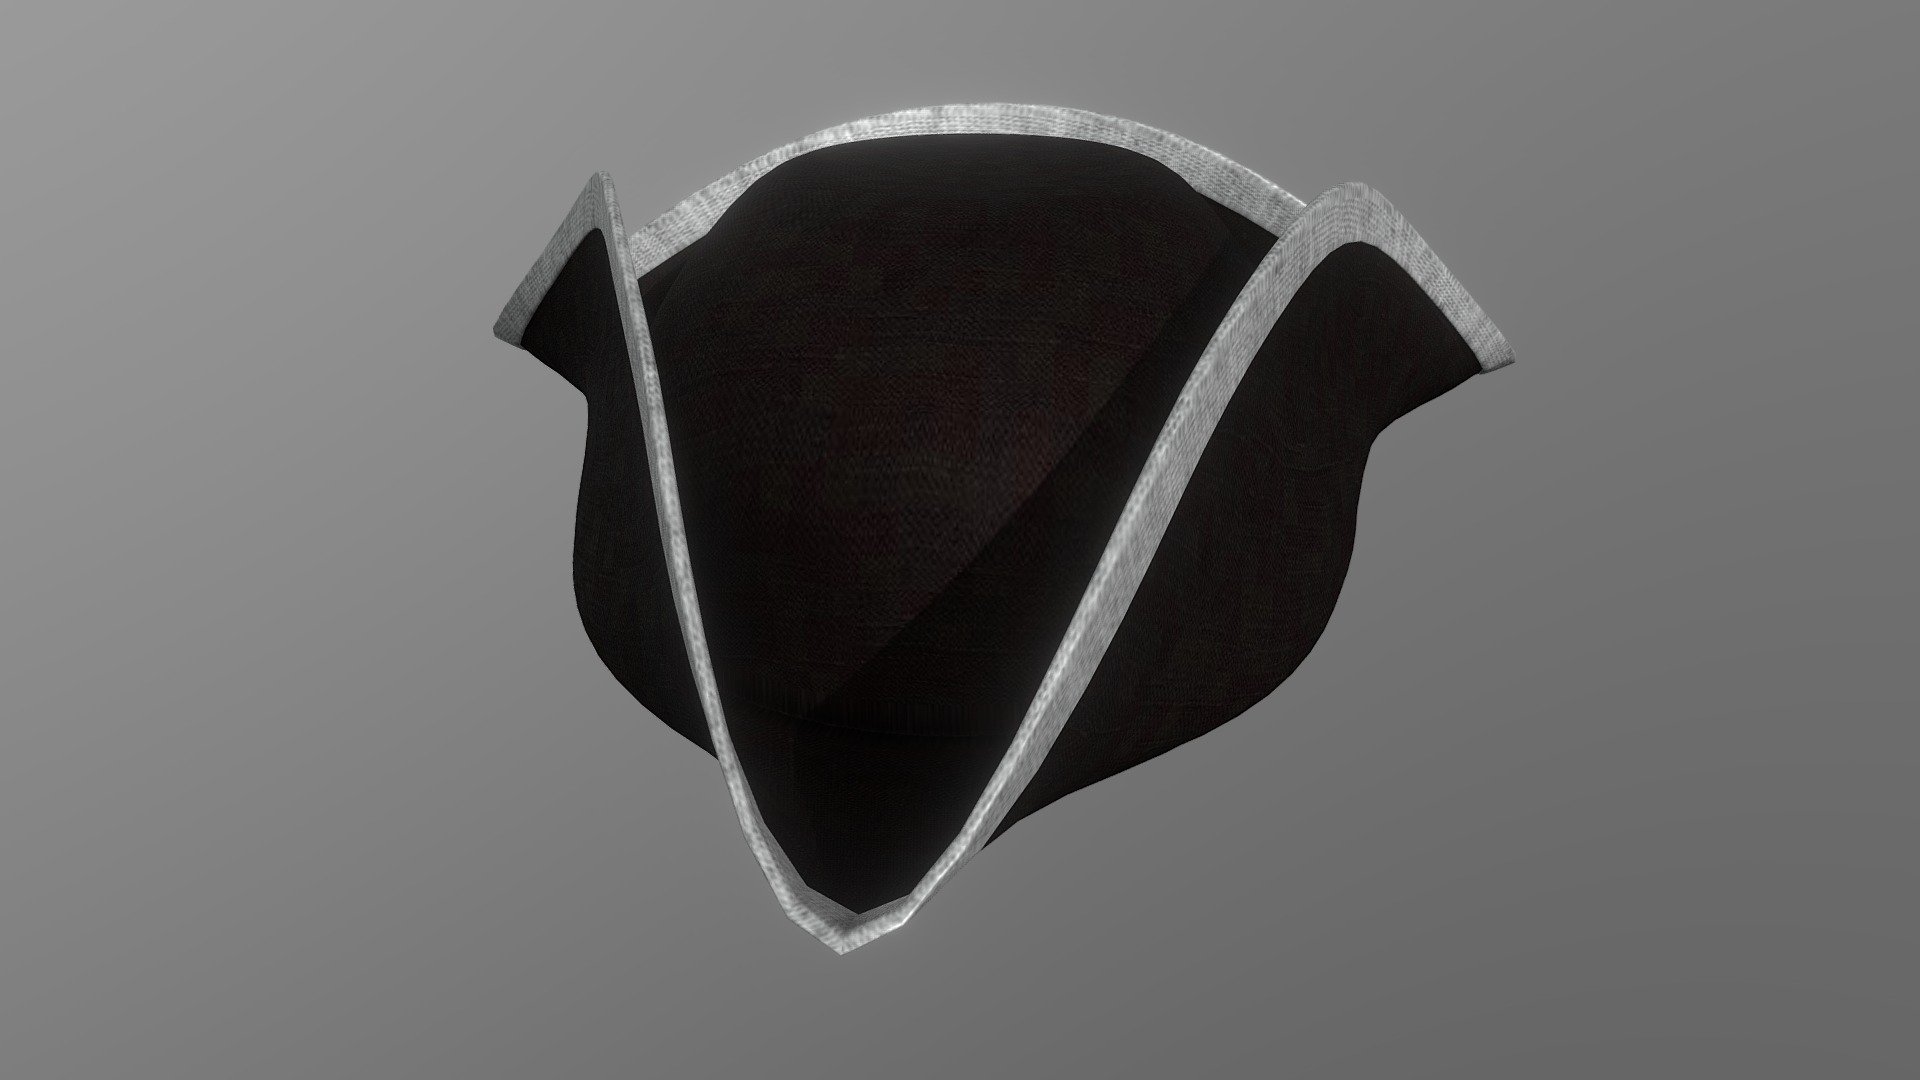 Tricorne Hat 1 (Brown)
Bring your 3D model of a Tricorne Hat 1 to life with this low-poly design. Perfect for use in games, animations, VR, AR, and more, this model is optimized for performance and still retains a high level of detail.


Features



Low poly design with 8,210 vertices

16,272 edges

8,064 faces (polygons)

16,128 tris

2k PBR Textures and materials

File formats included: .obj, .fbx, .dae


Tools Used
This Tricorne Hat 1 3D model was created using Blender 3.3.1, a popular and versatile 3D creation software.


Availability
This low-poly Tricorne Hat 1 3D model is ready for use and available for purchase. Bring your project to the next level with this high-quality and optimized model 3d model